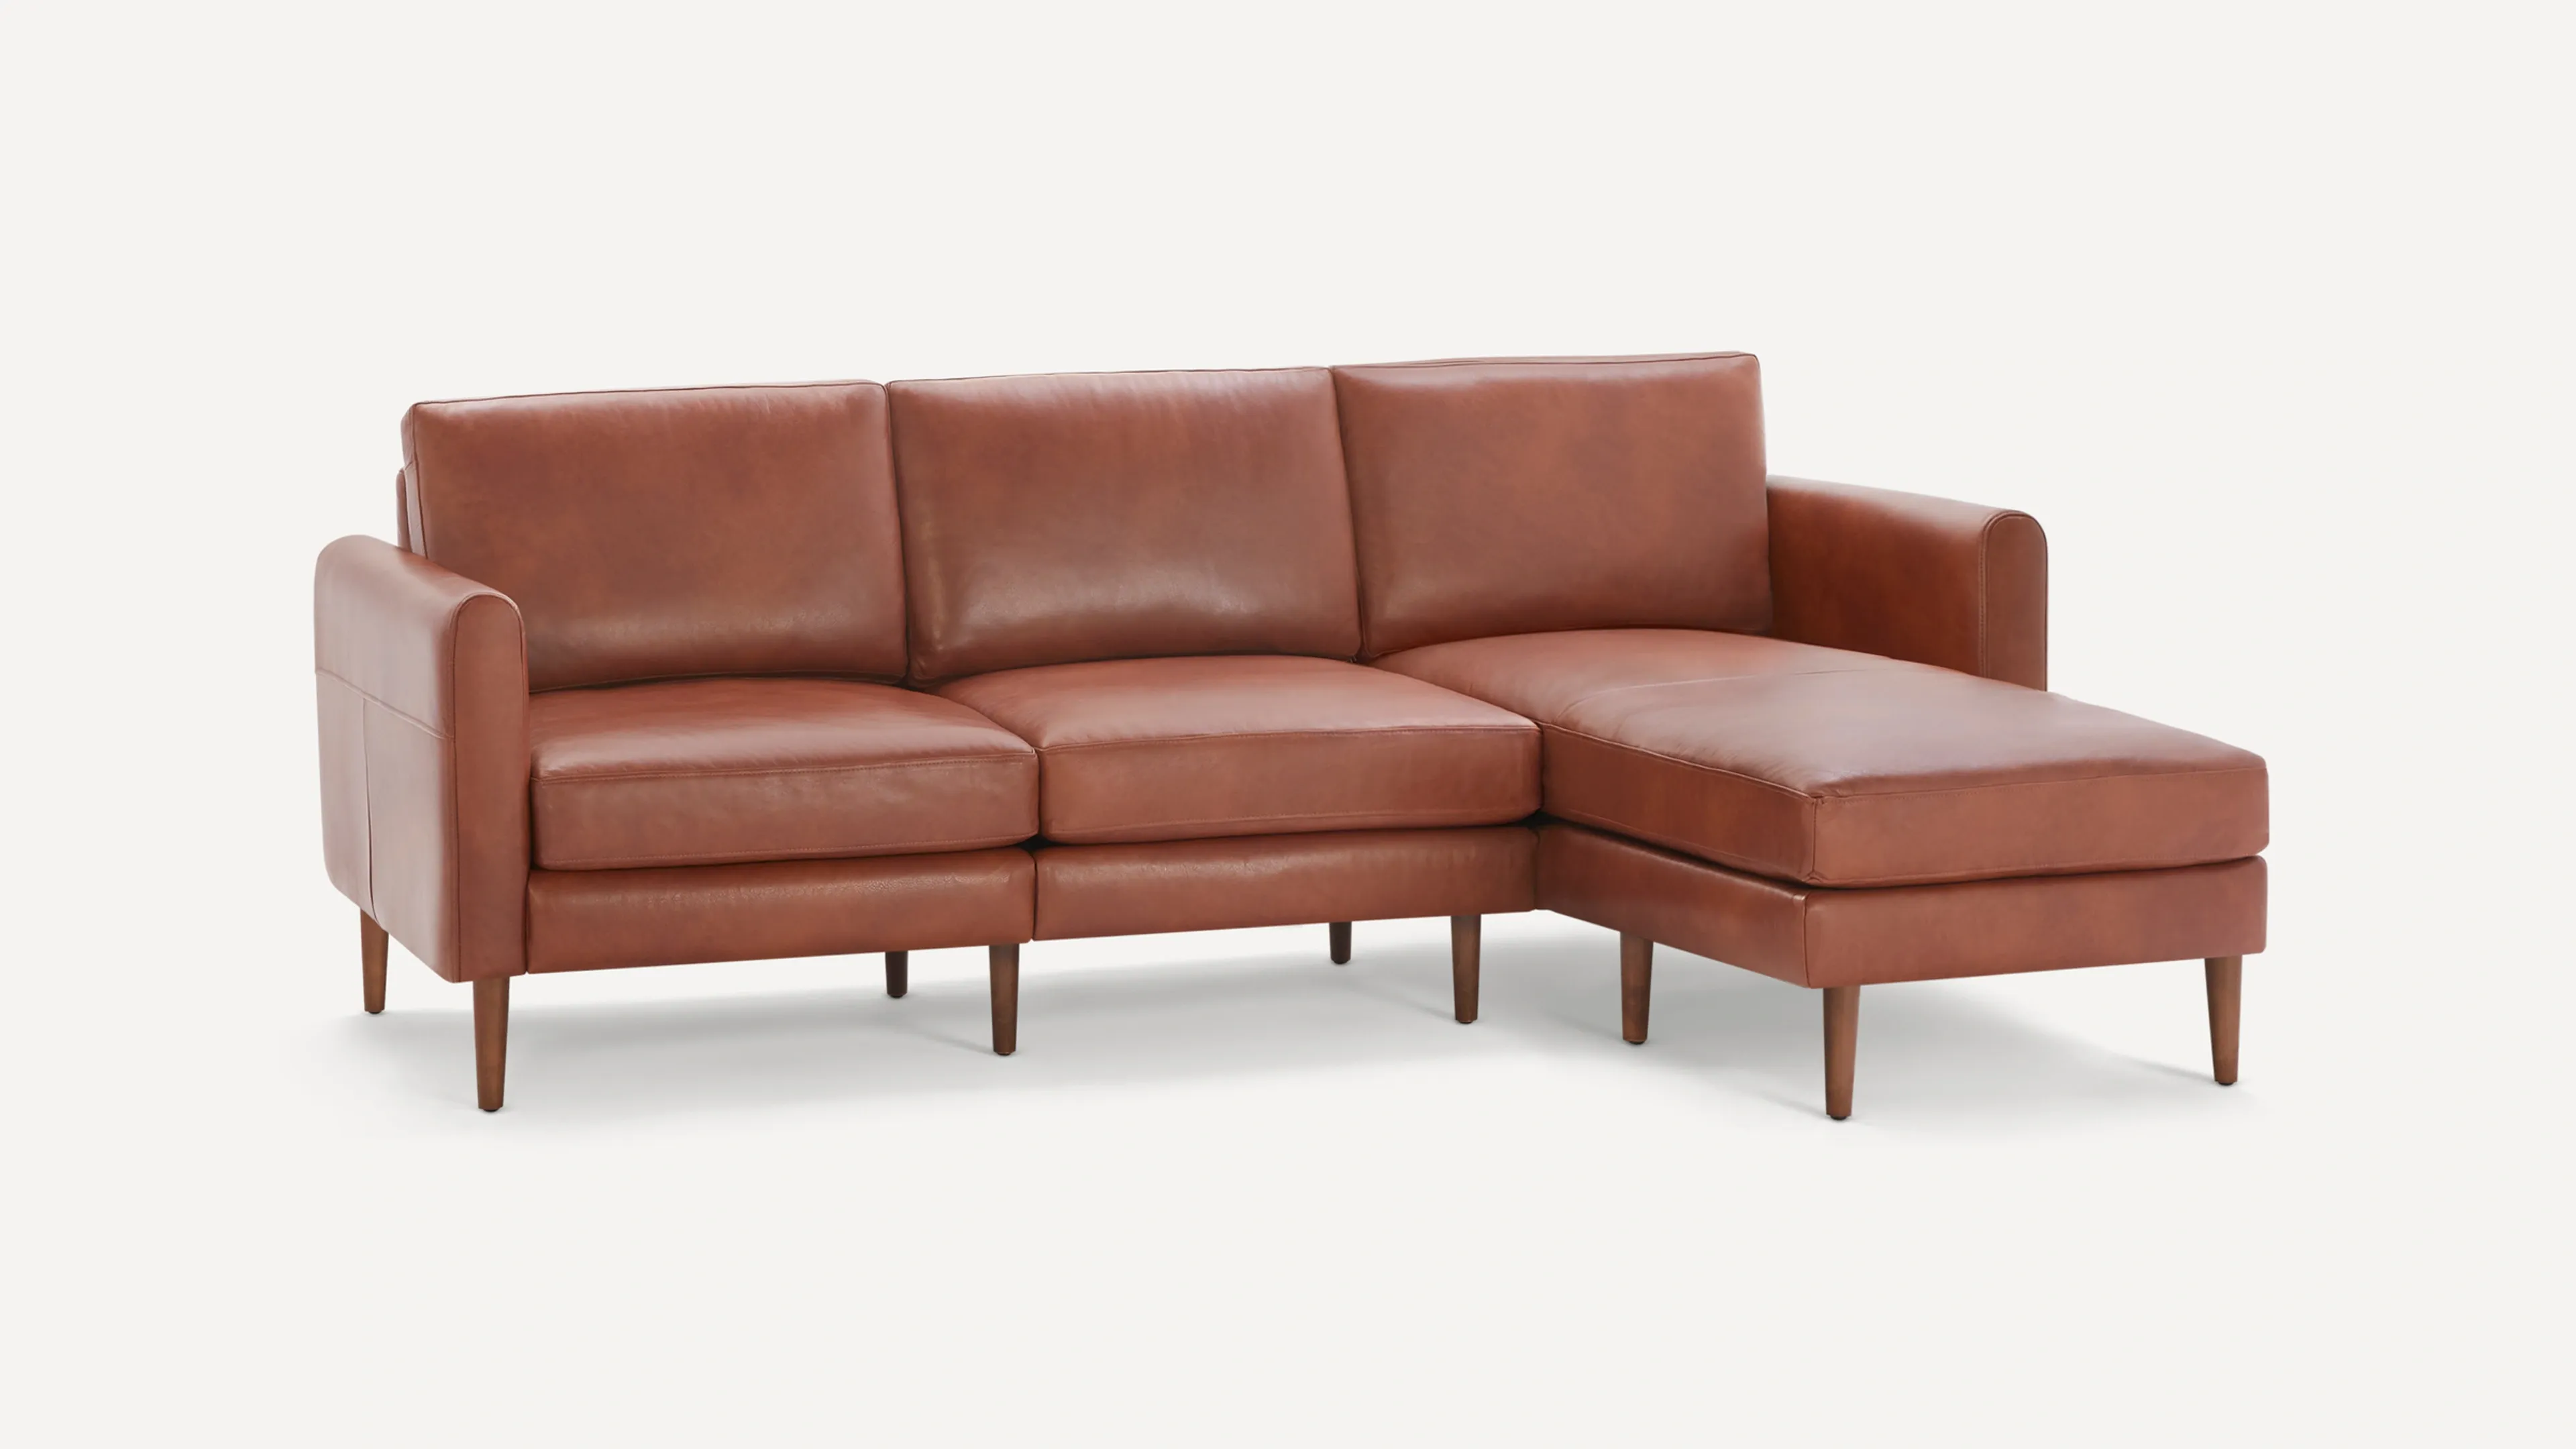 Original Nomad Chaise Sofa in Chestnut Leather